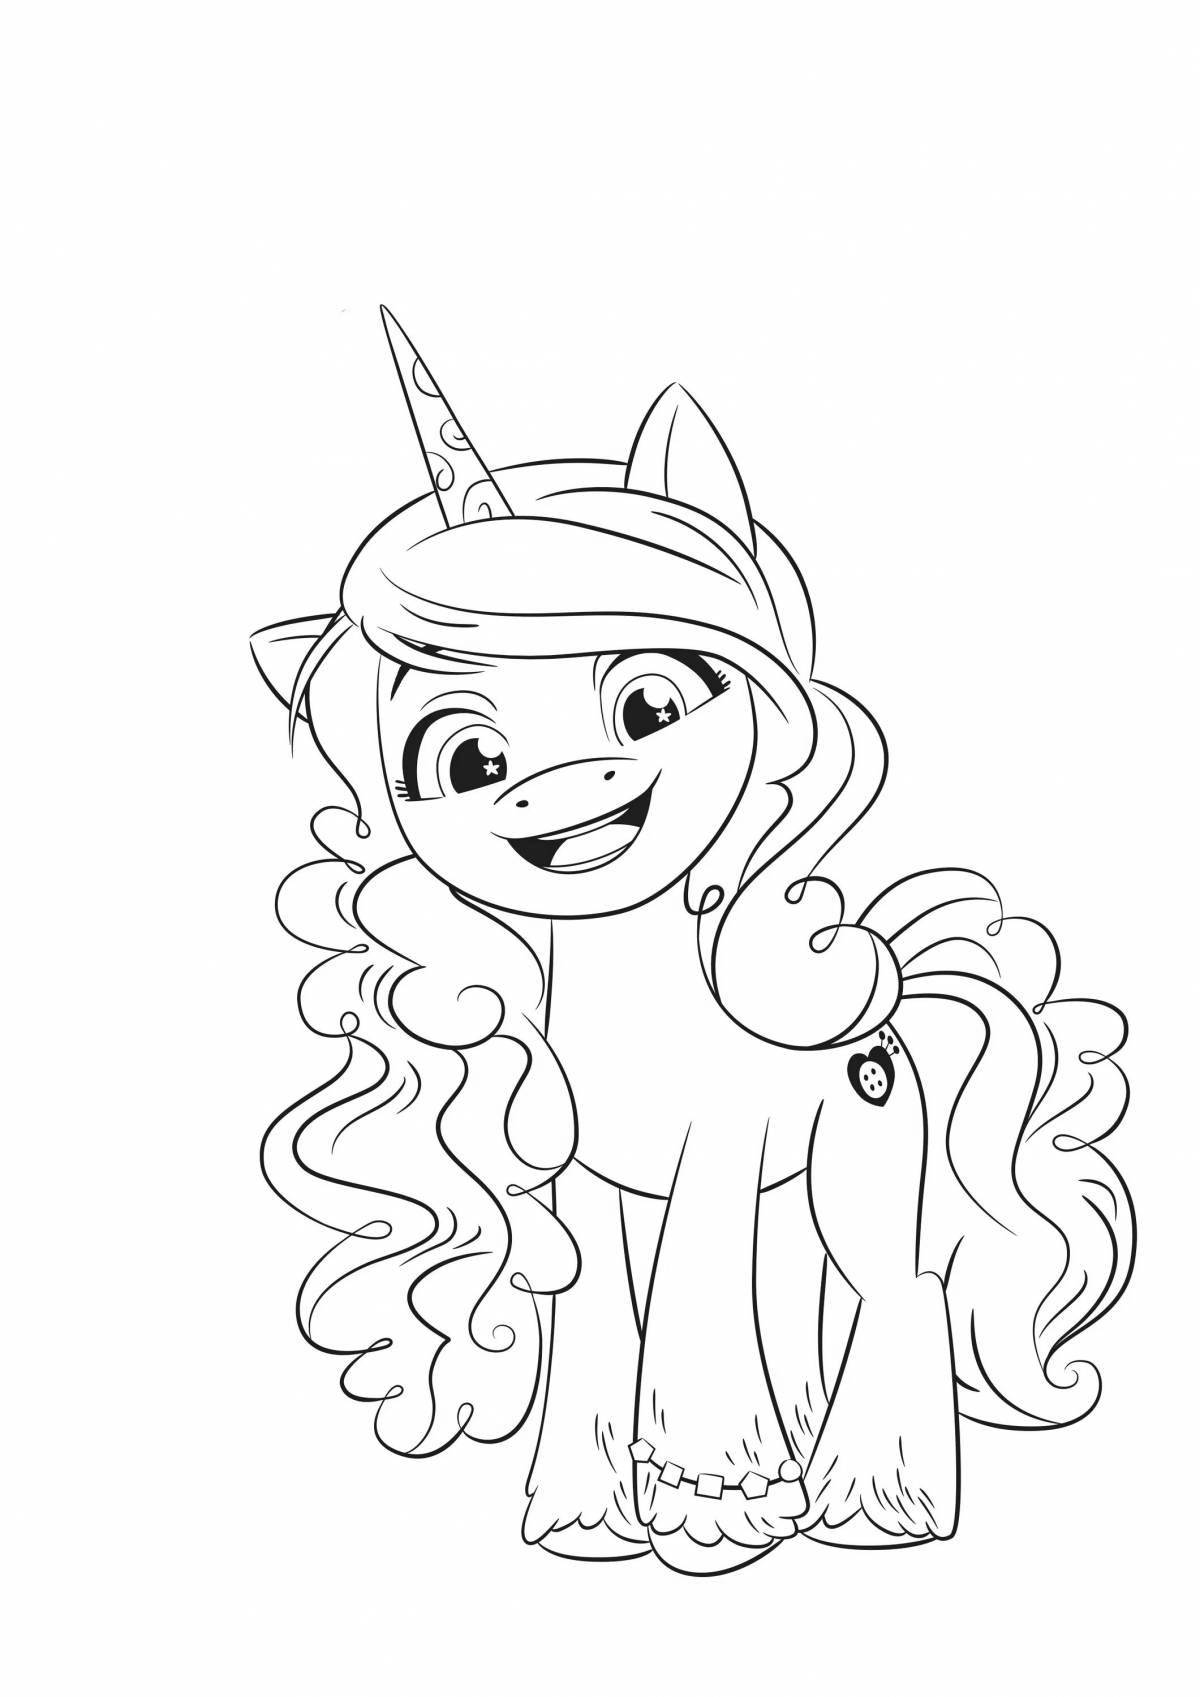 Exciting pony sleigh coloring book